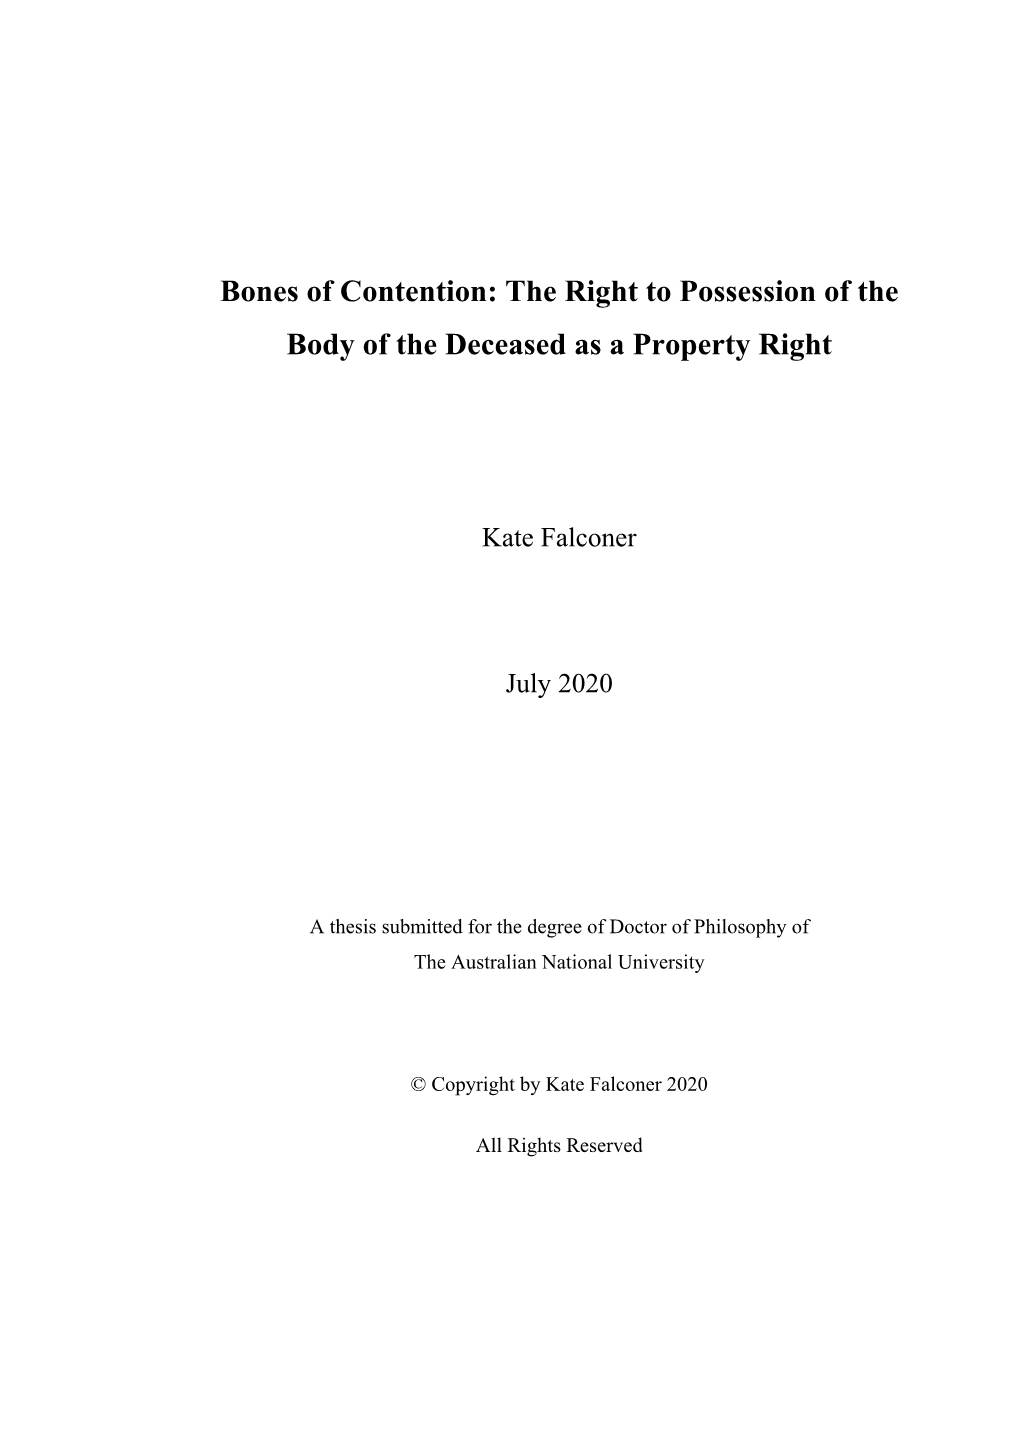 The Right to Possession of the Body of the Deceased As a Property Right